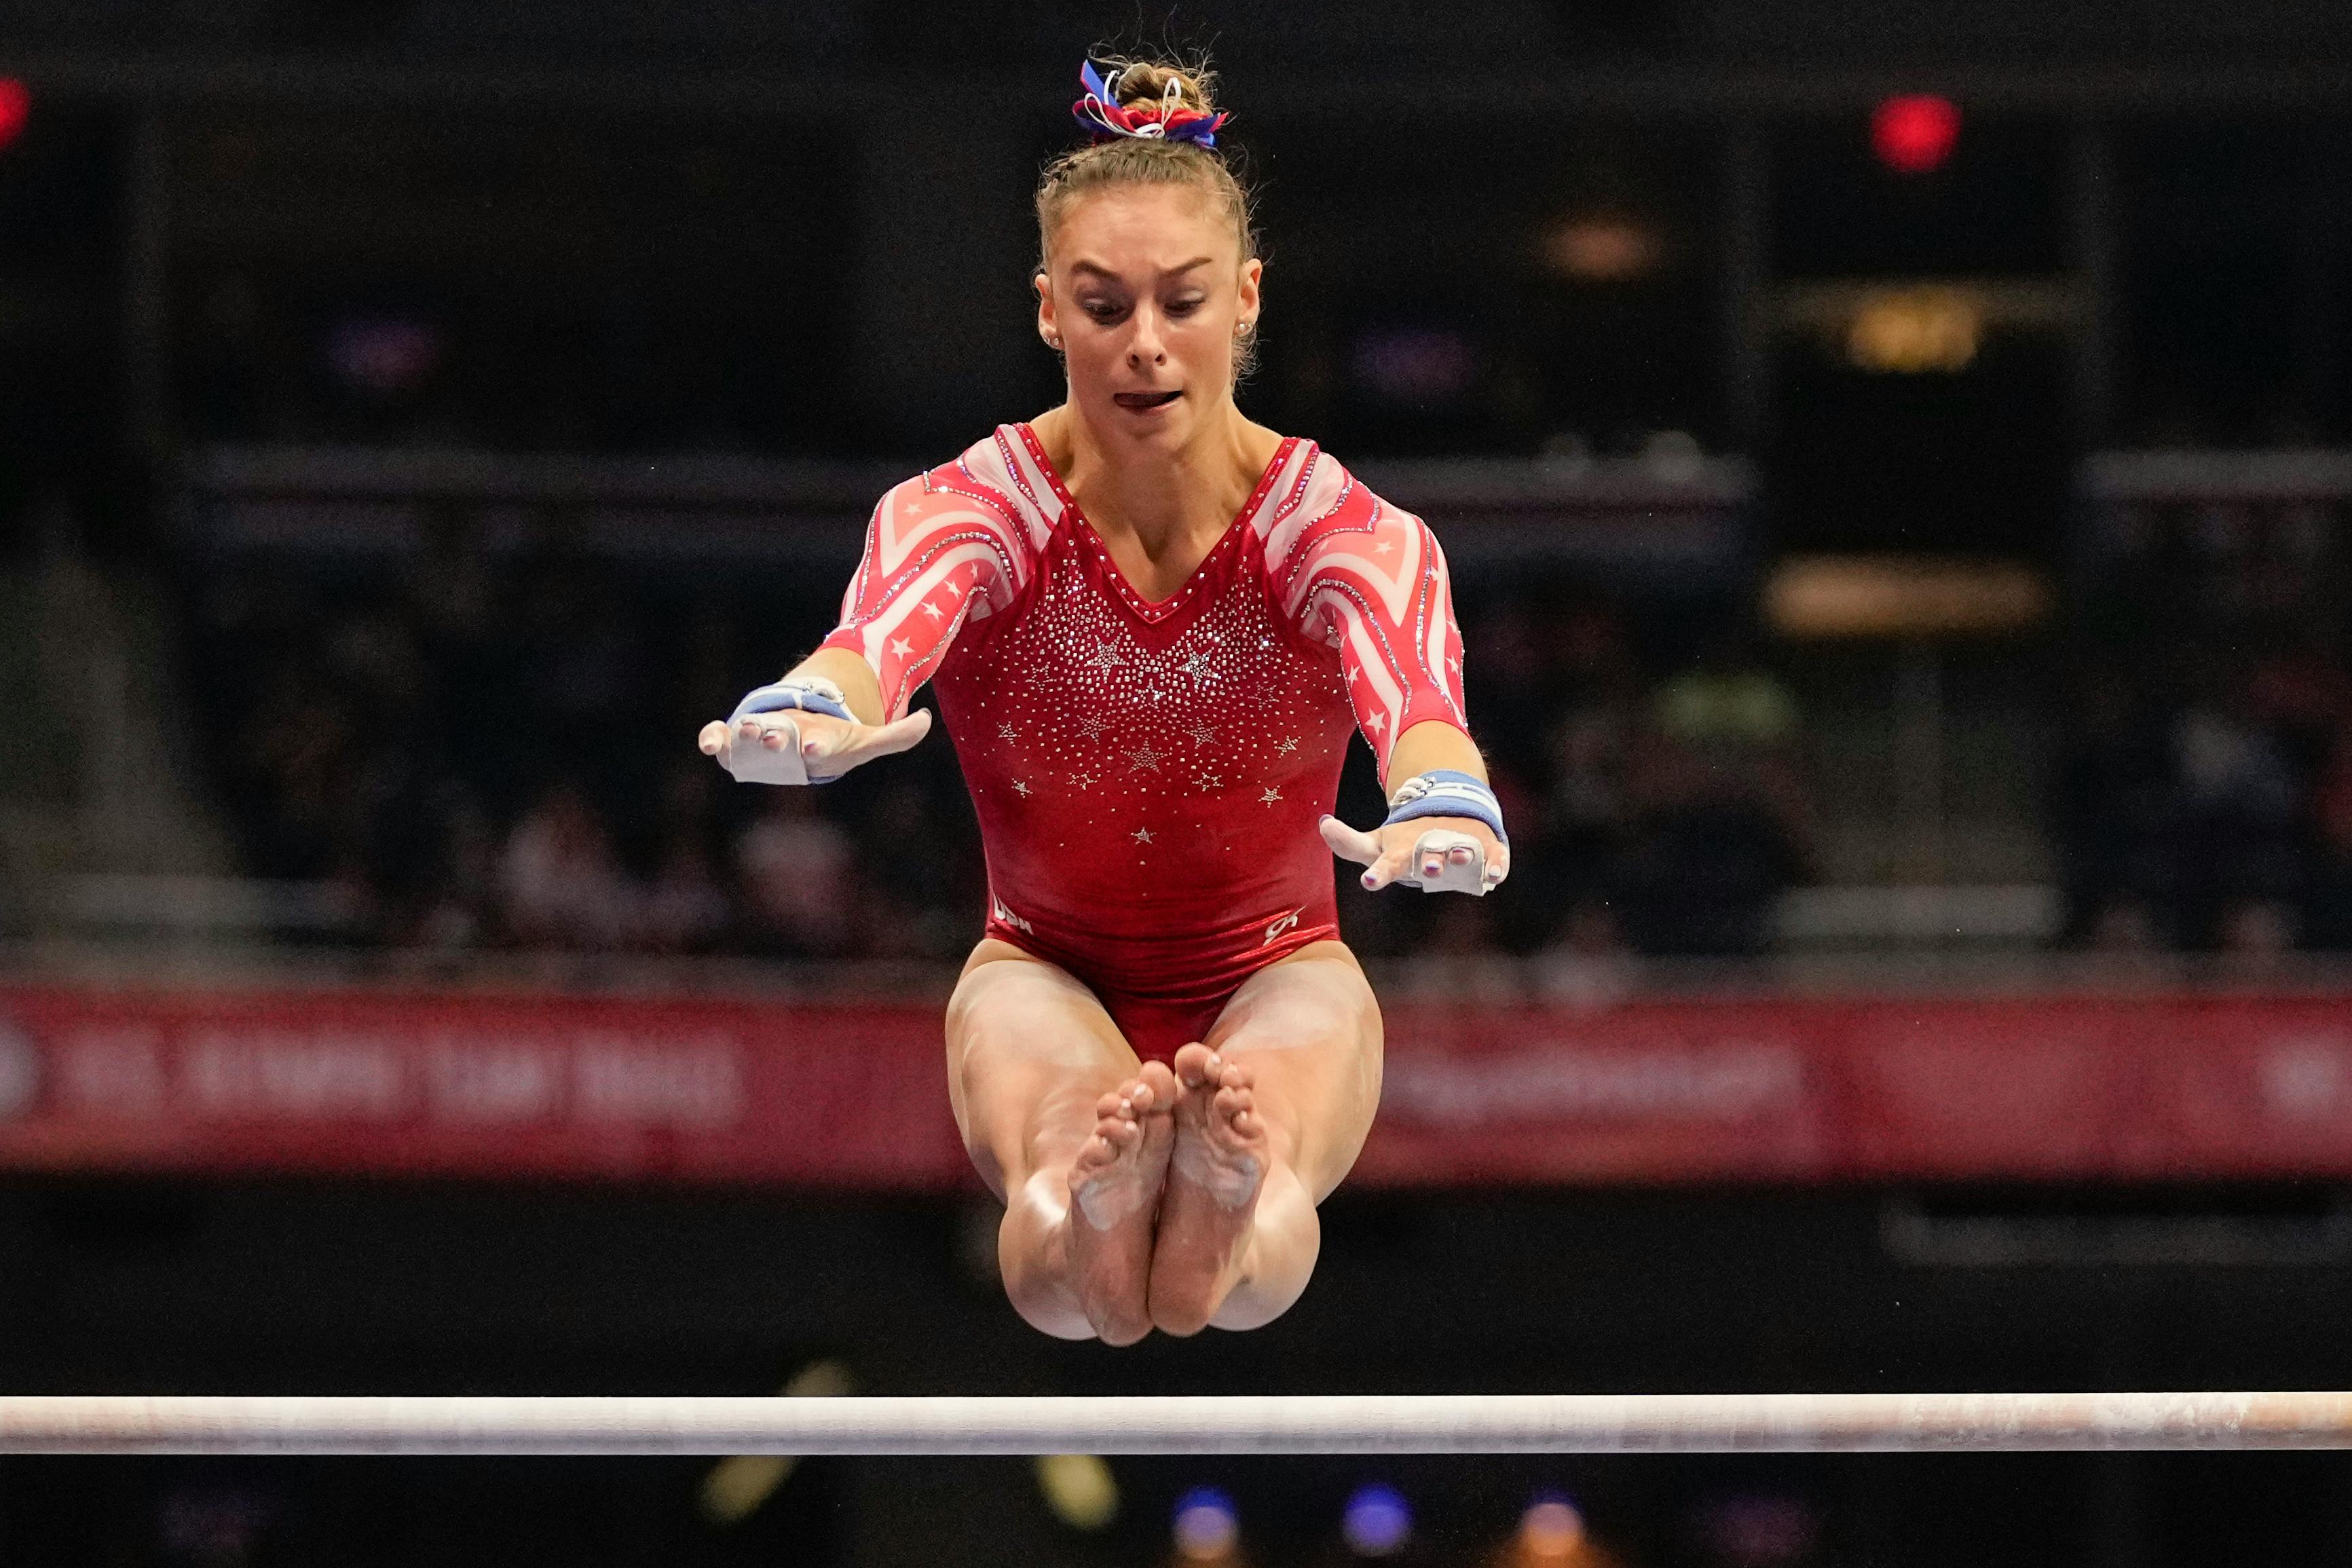 Canadian Olympic artistic gymnastics team announced for Tokyo Games